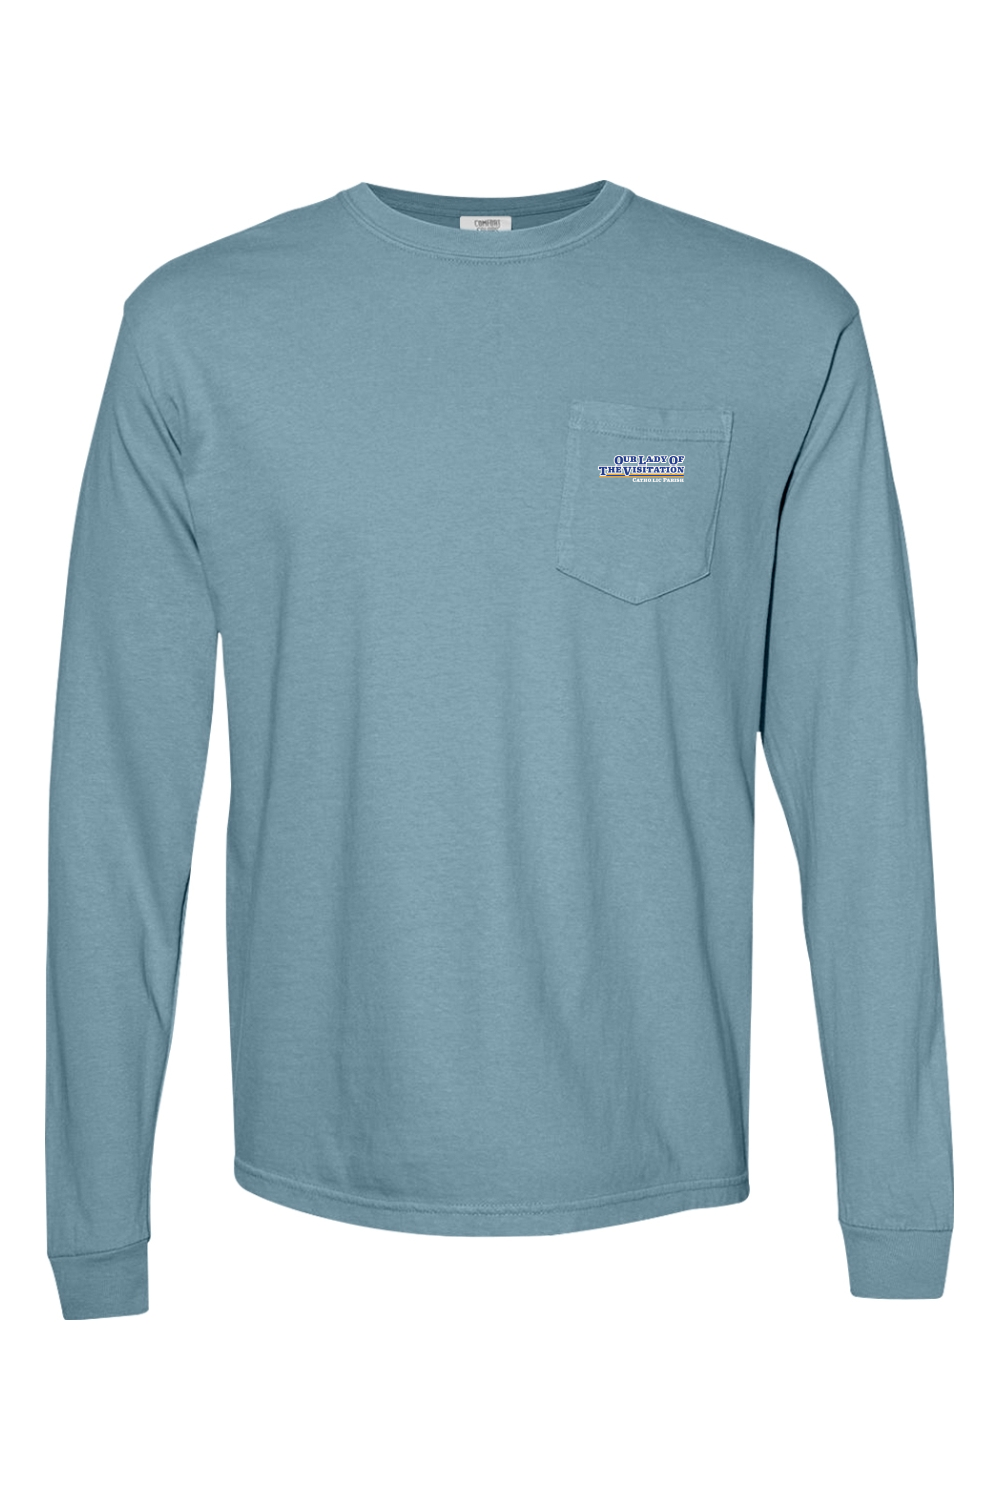 Our Lady of the Visitation Bold Pocket Long Sleeve